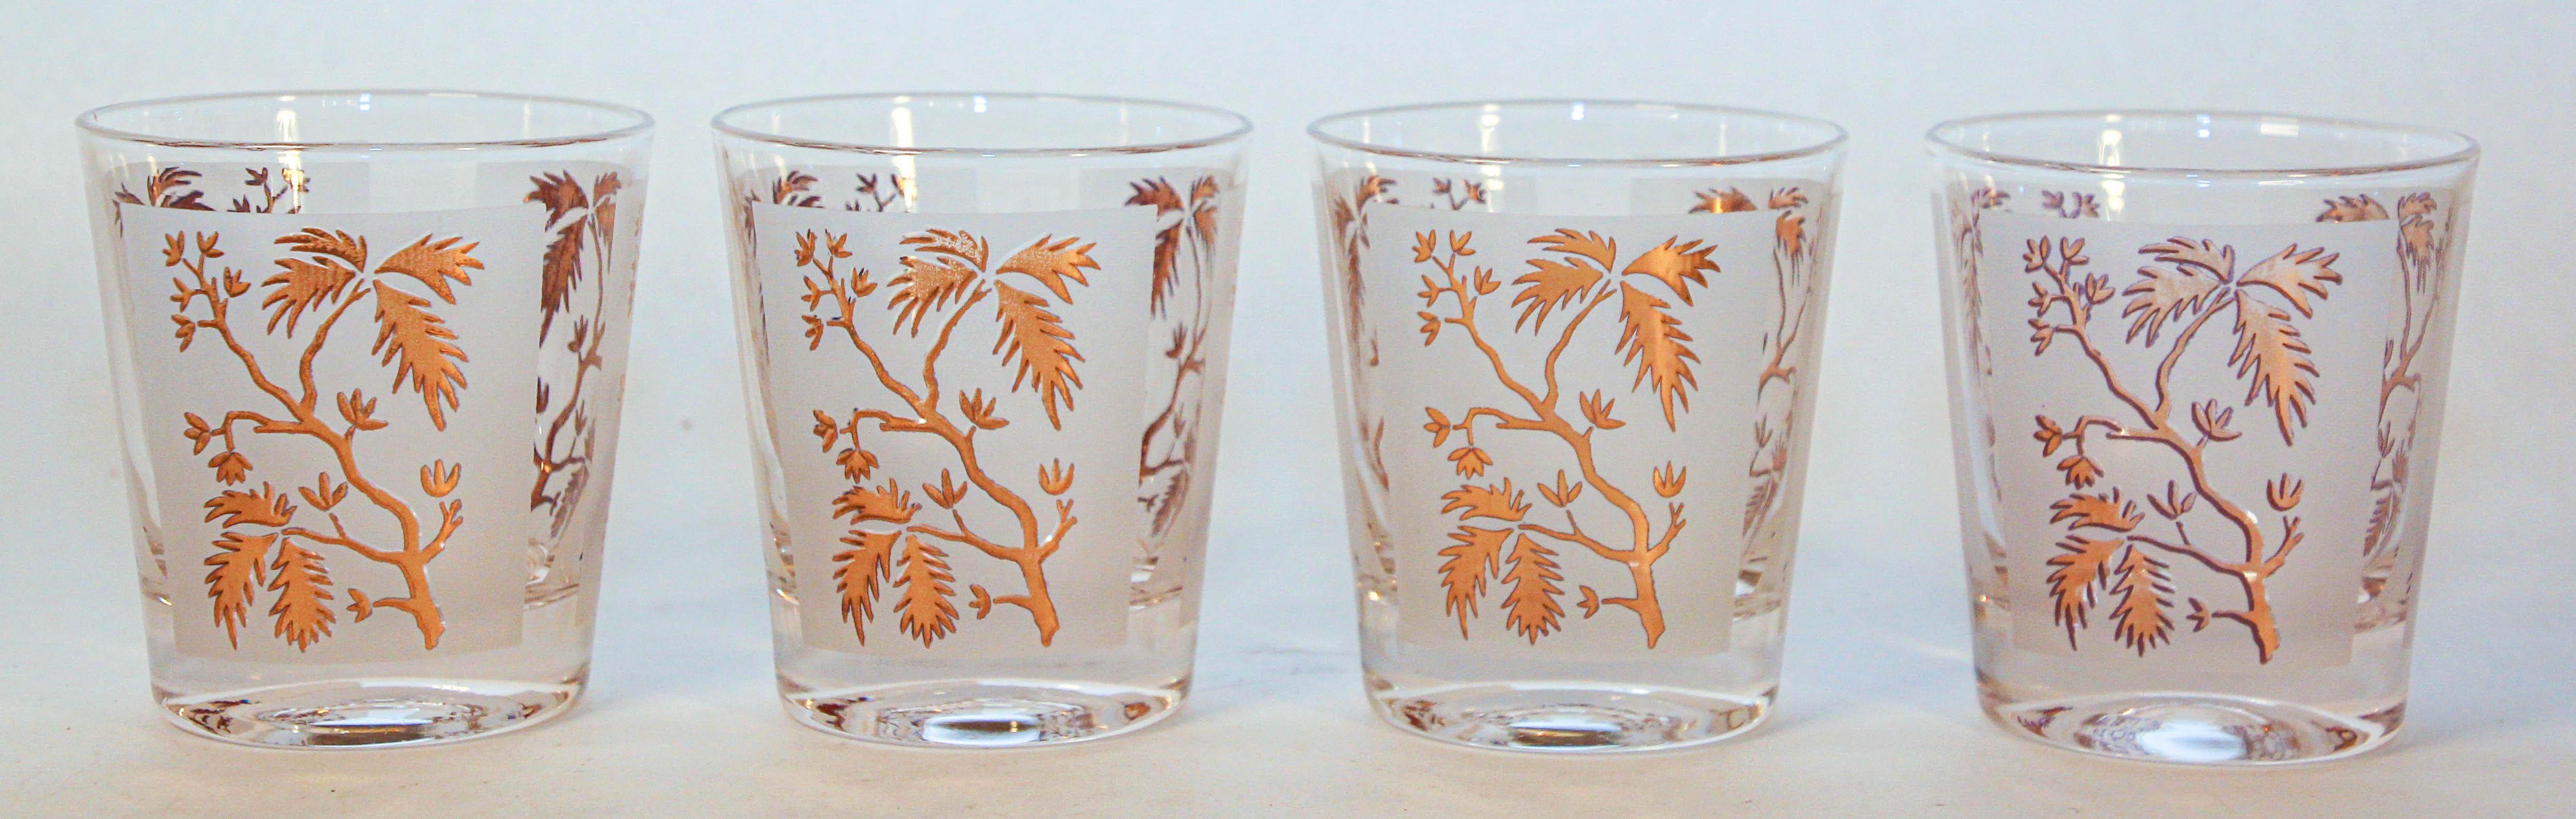 Georges Briard Gold Leaf Old Fashioned Frosted Cocktail Glasses.
Set of 4 Mid Century Modern old fashioned glasses designed by Georges Briard and feature a gold leaf Japanese style tree design.
The tree design is the repeating 3 times with the same